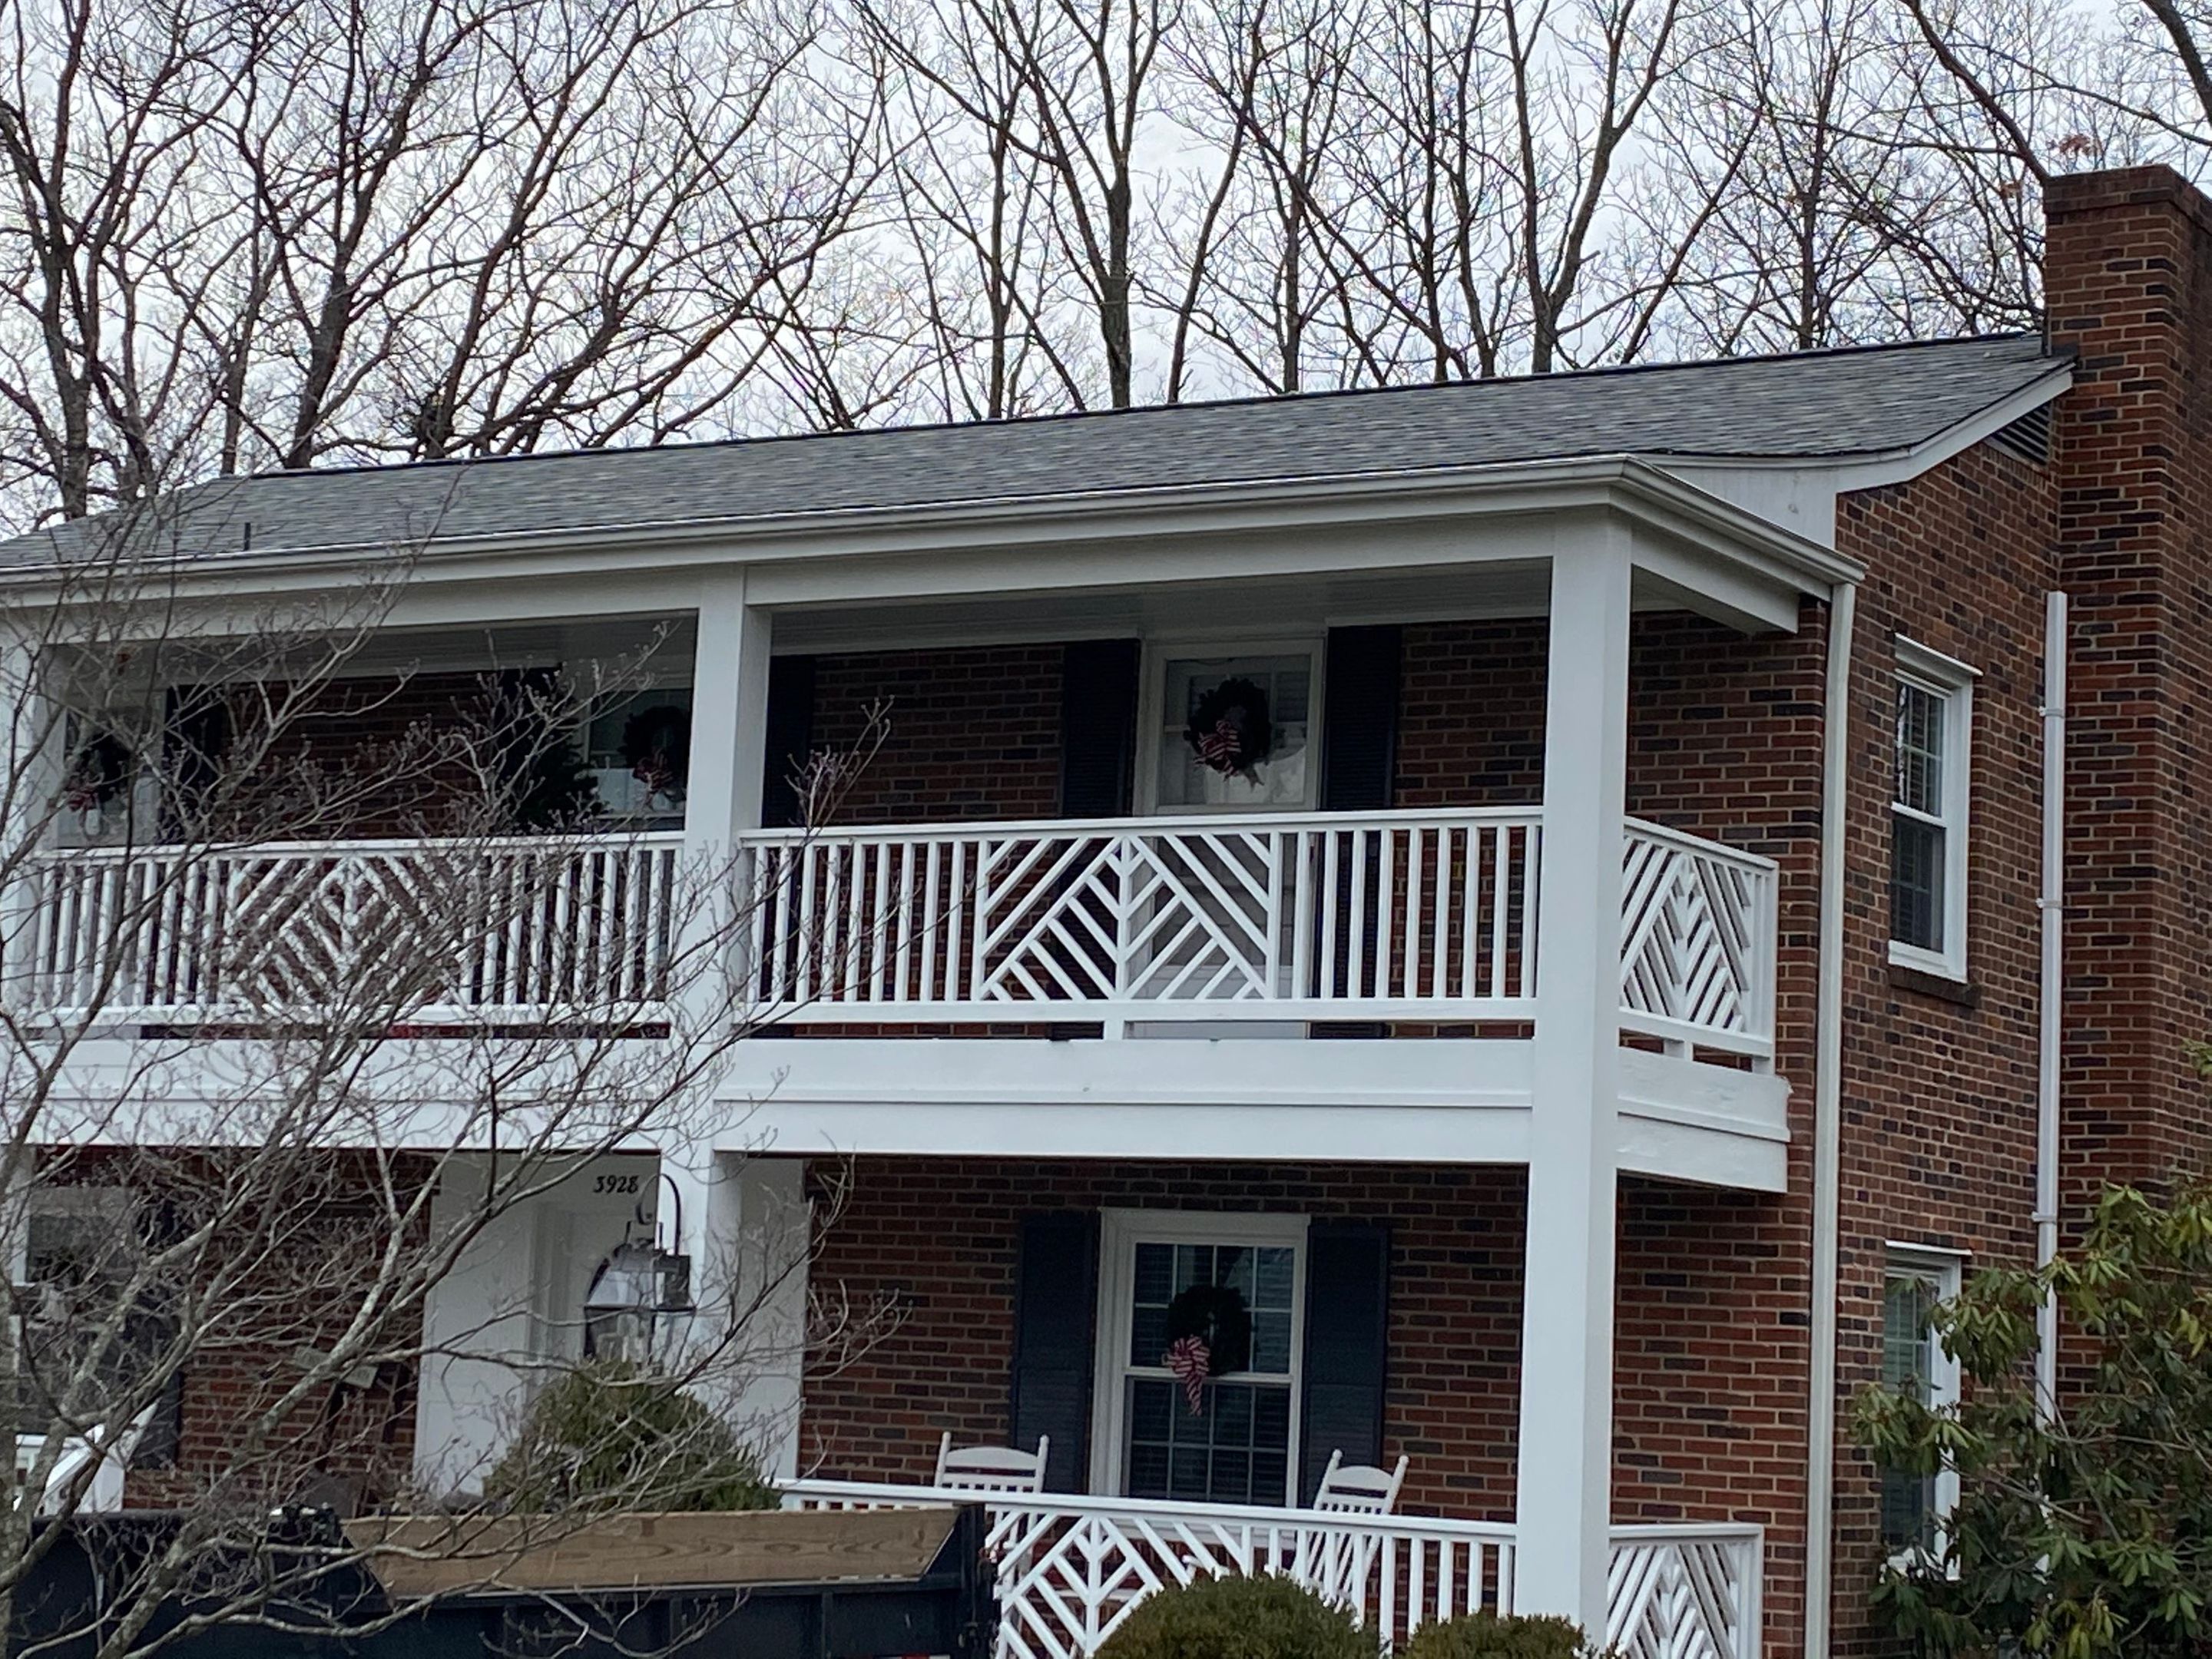 New porch and railing, looks great